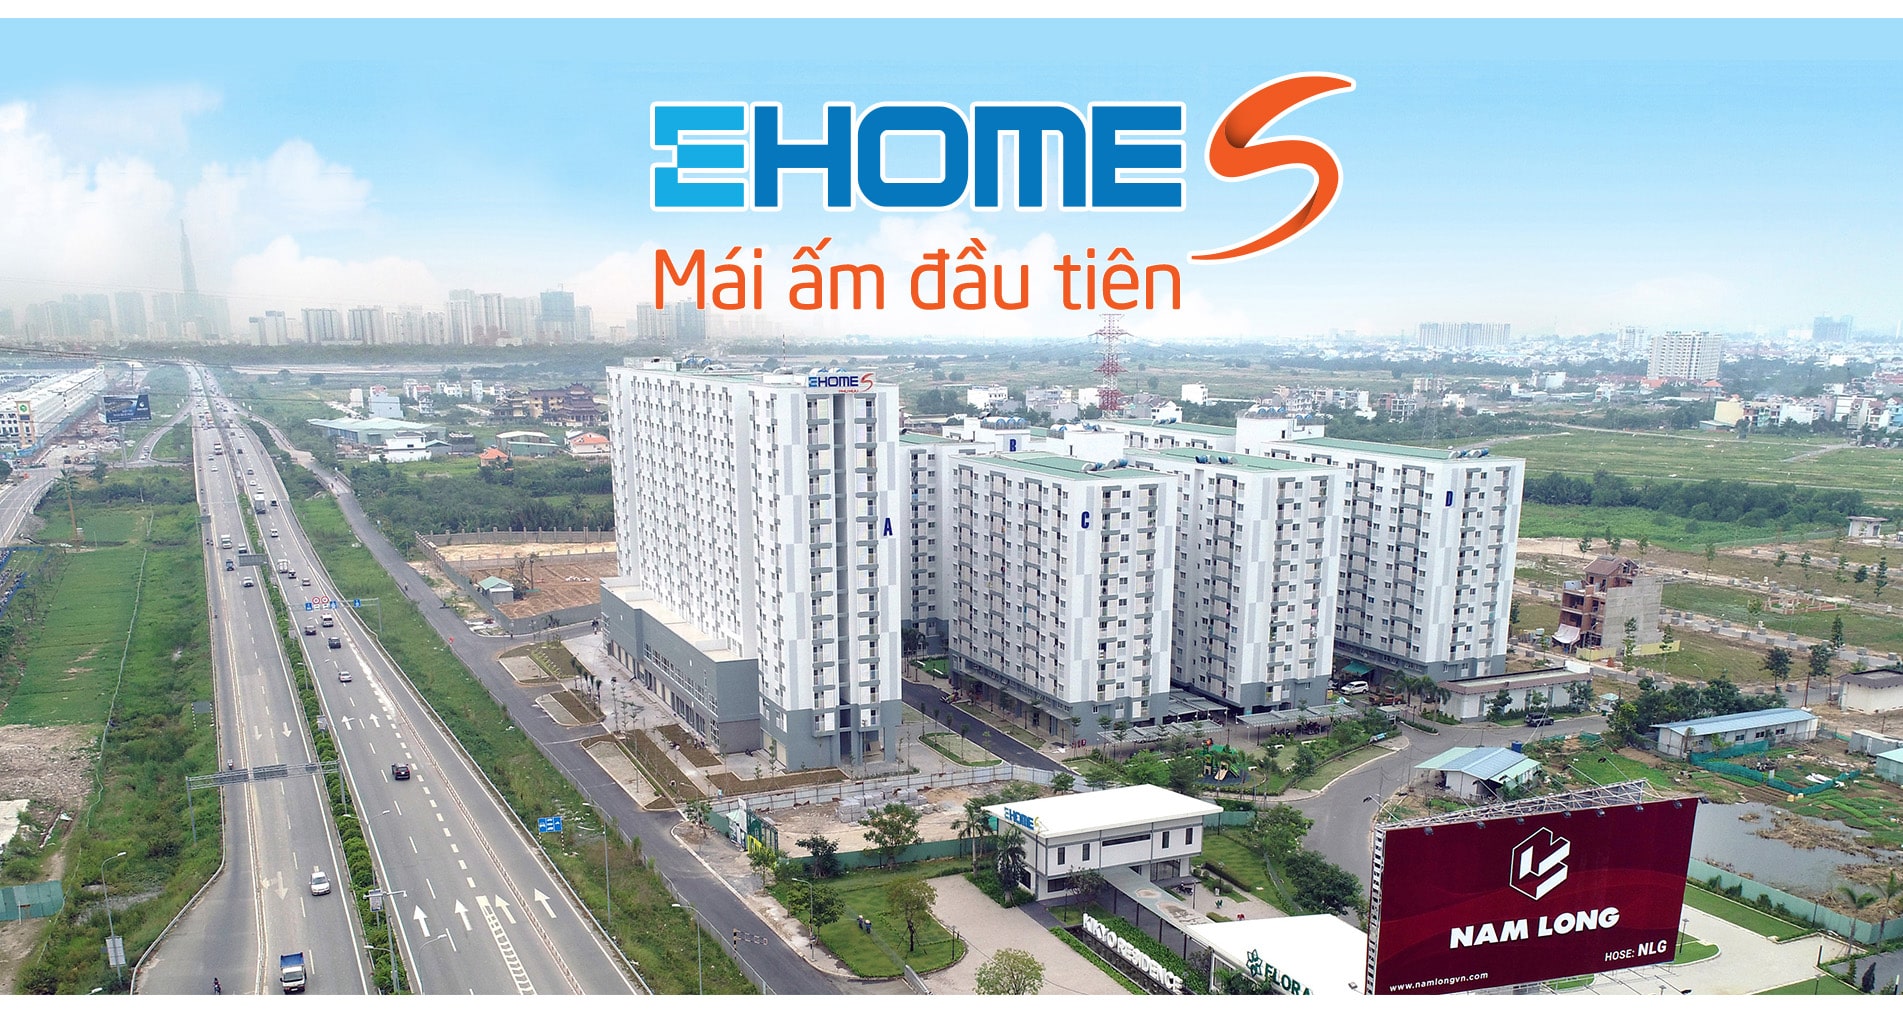 banner EHOMES - EHOME S